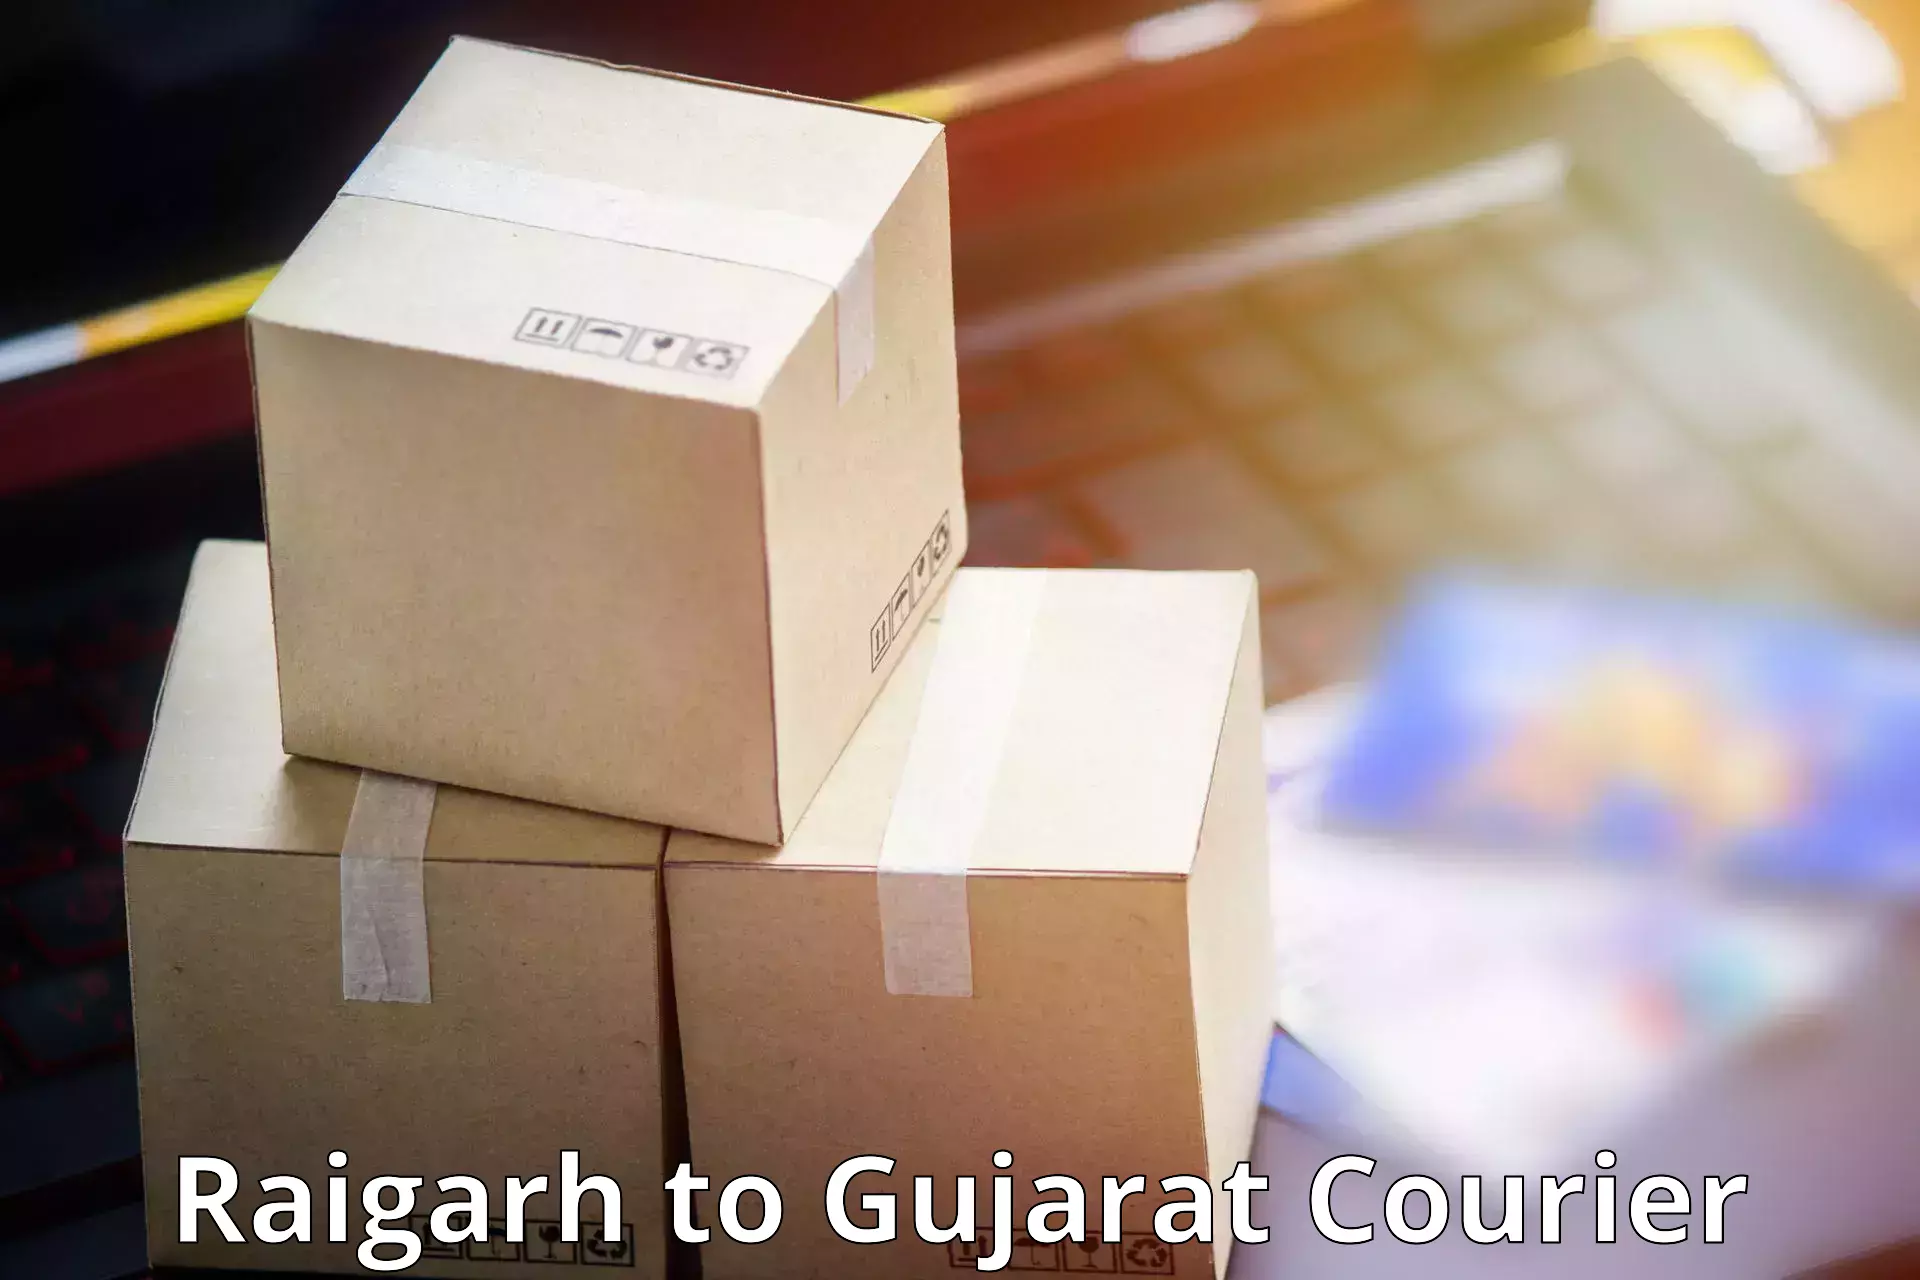 Courier service partnerships Raigarh to Mehsana